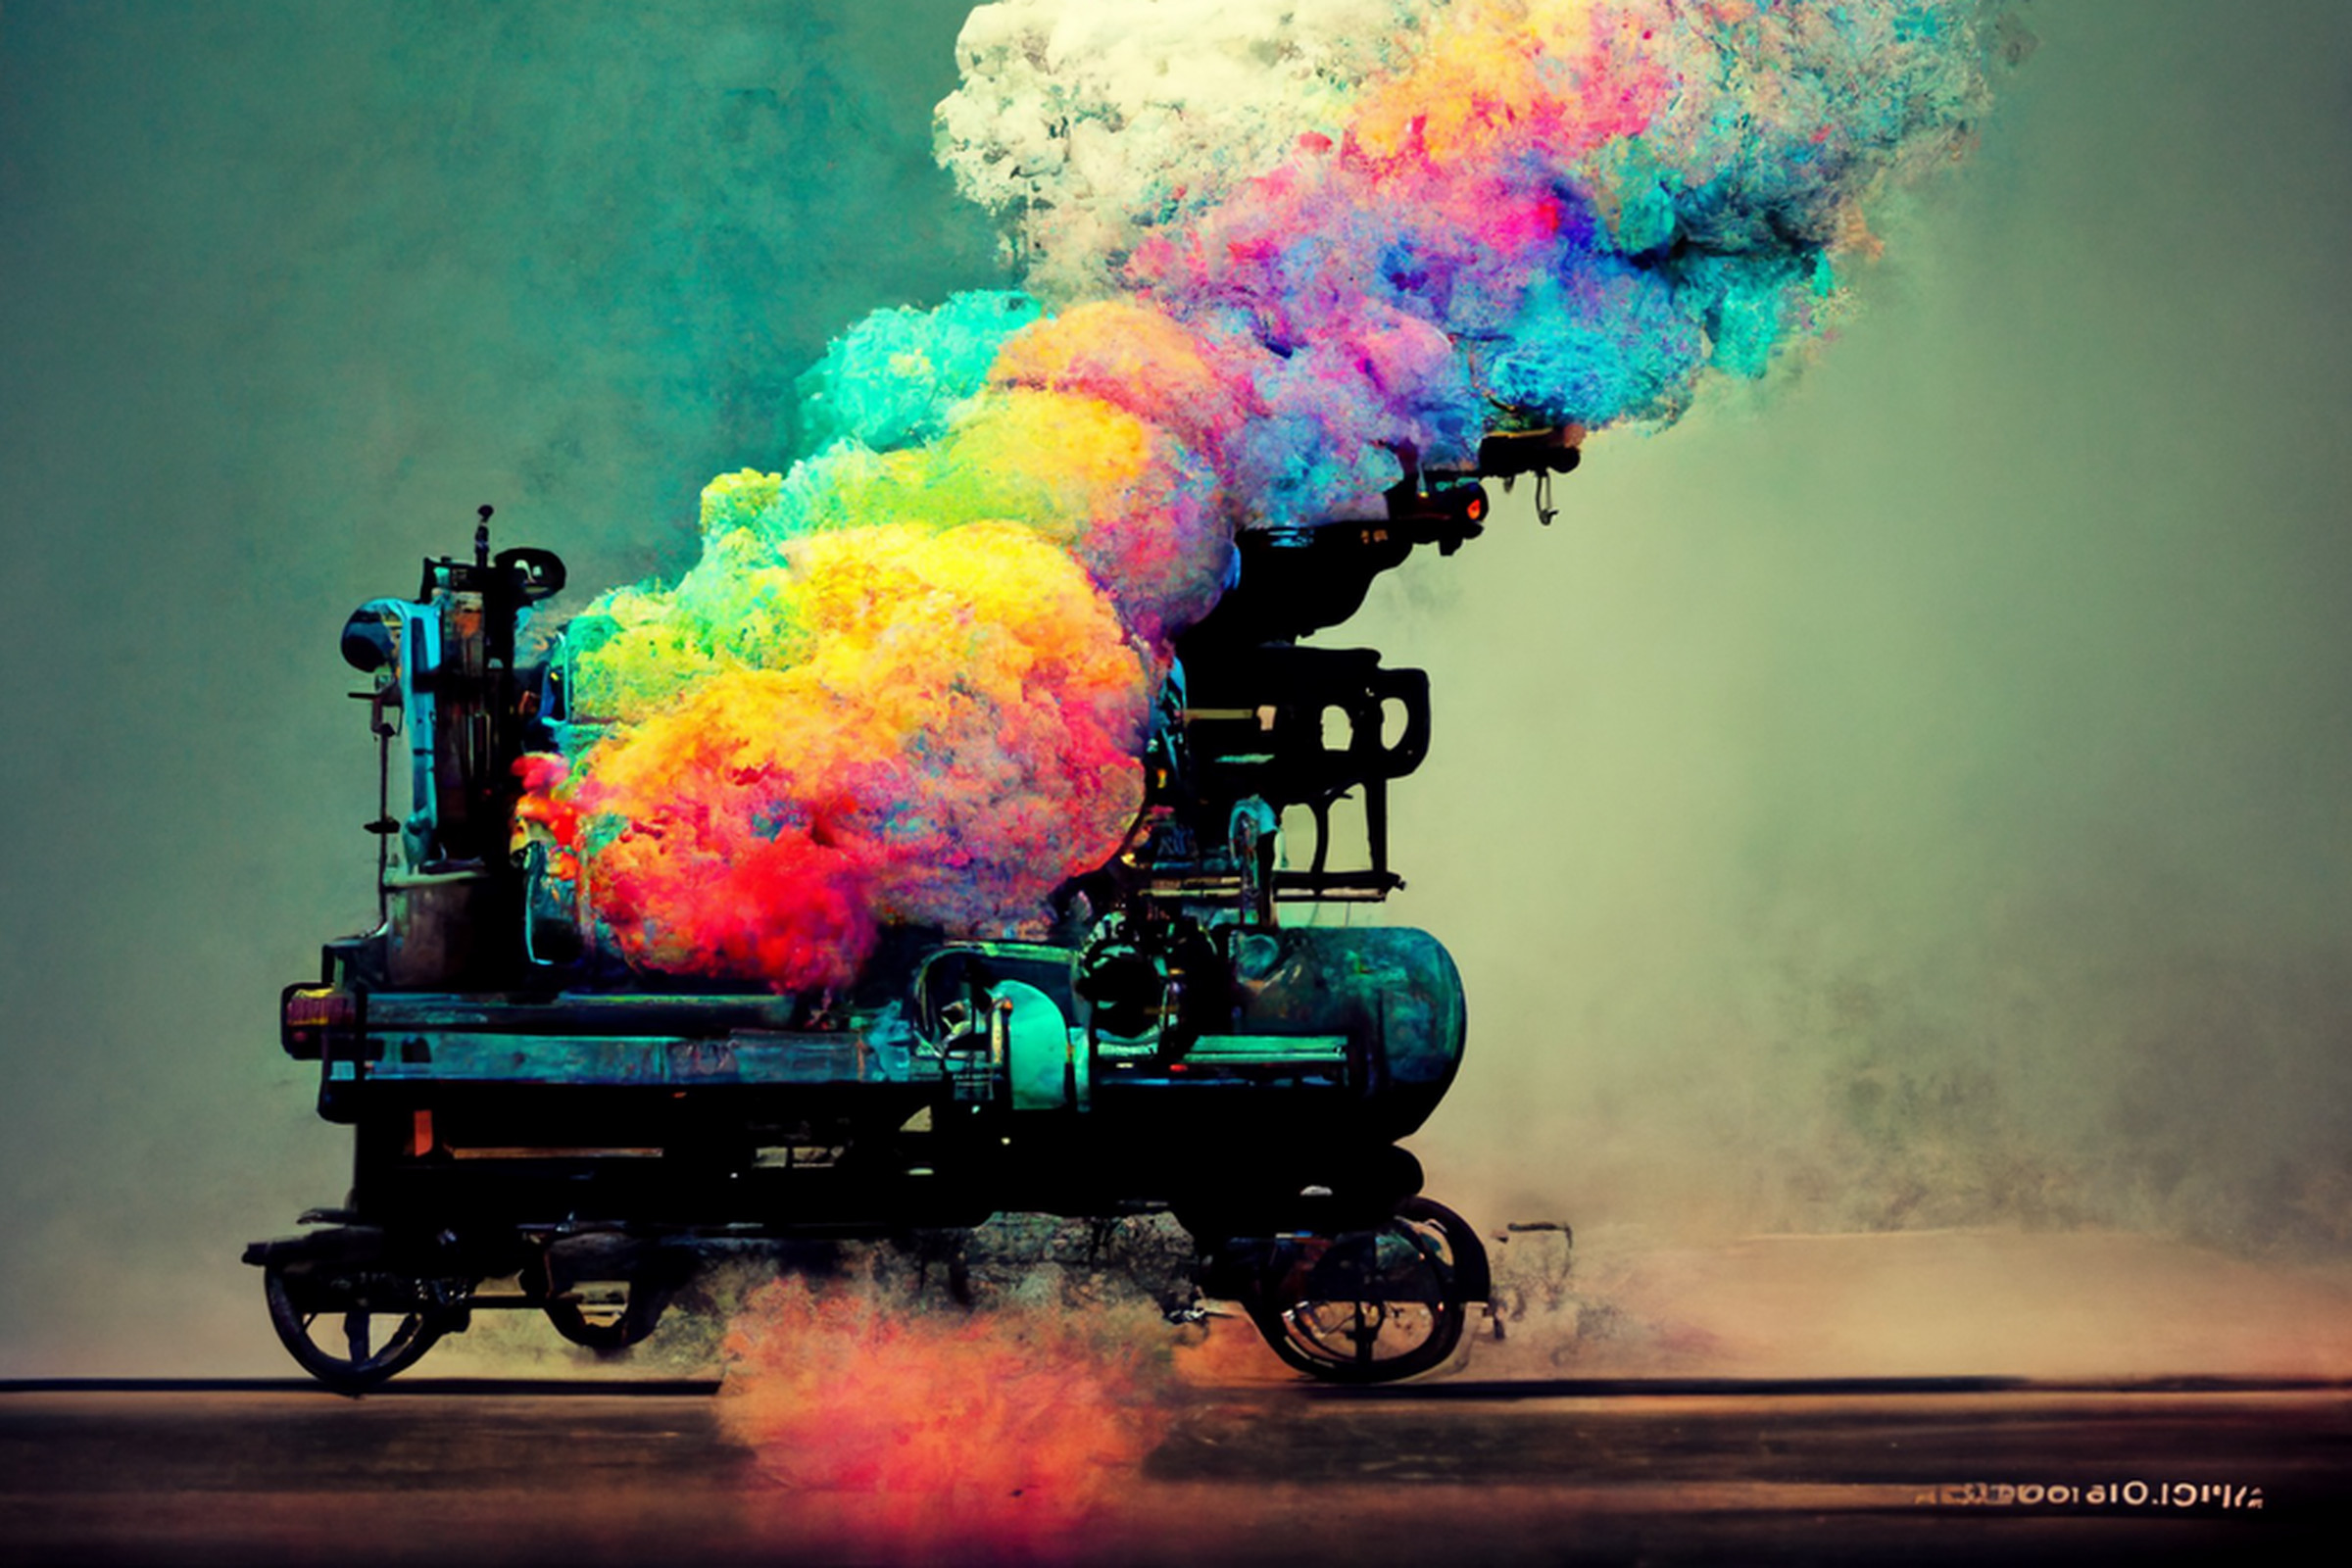 An AI-generated image was made with the following prompt: “A robot steam engine, barreling down the tracks at terrific speed, emitting clouds of colorful smoke.”